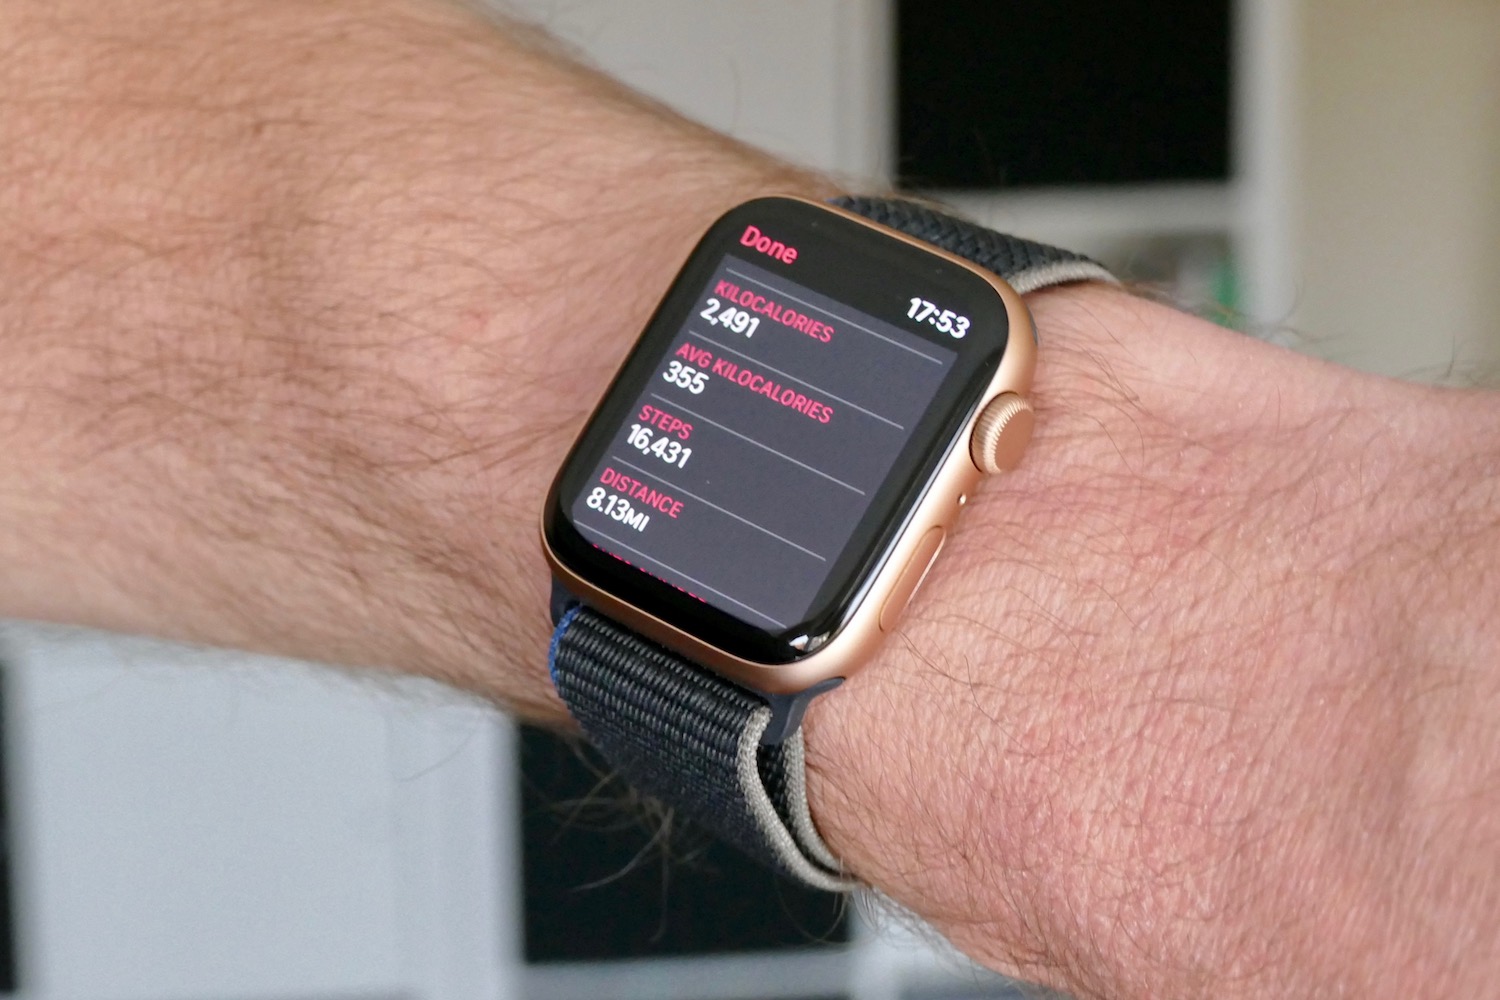 Apple Watch SE on a person's wrist shows a weekly health-tracking summary.